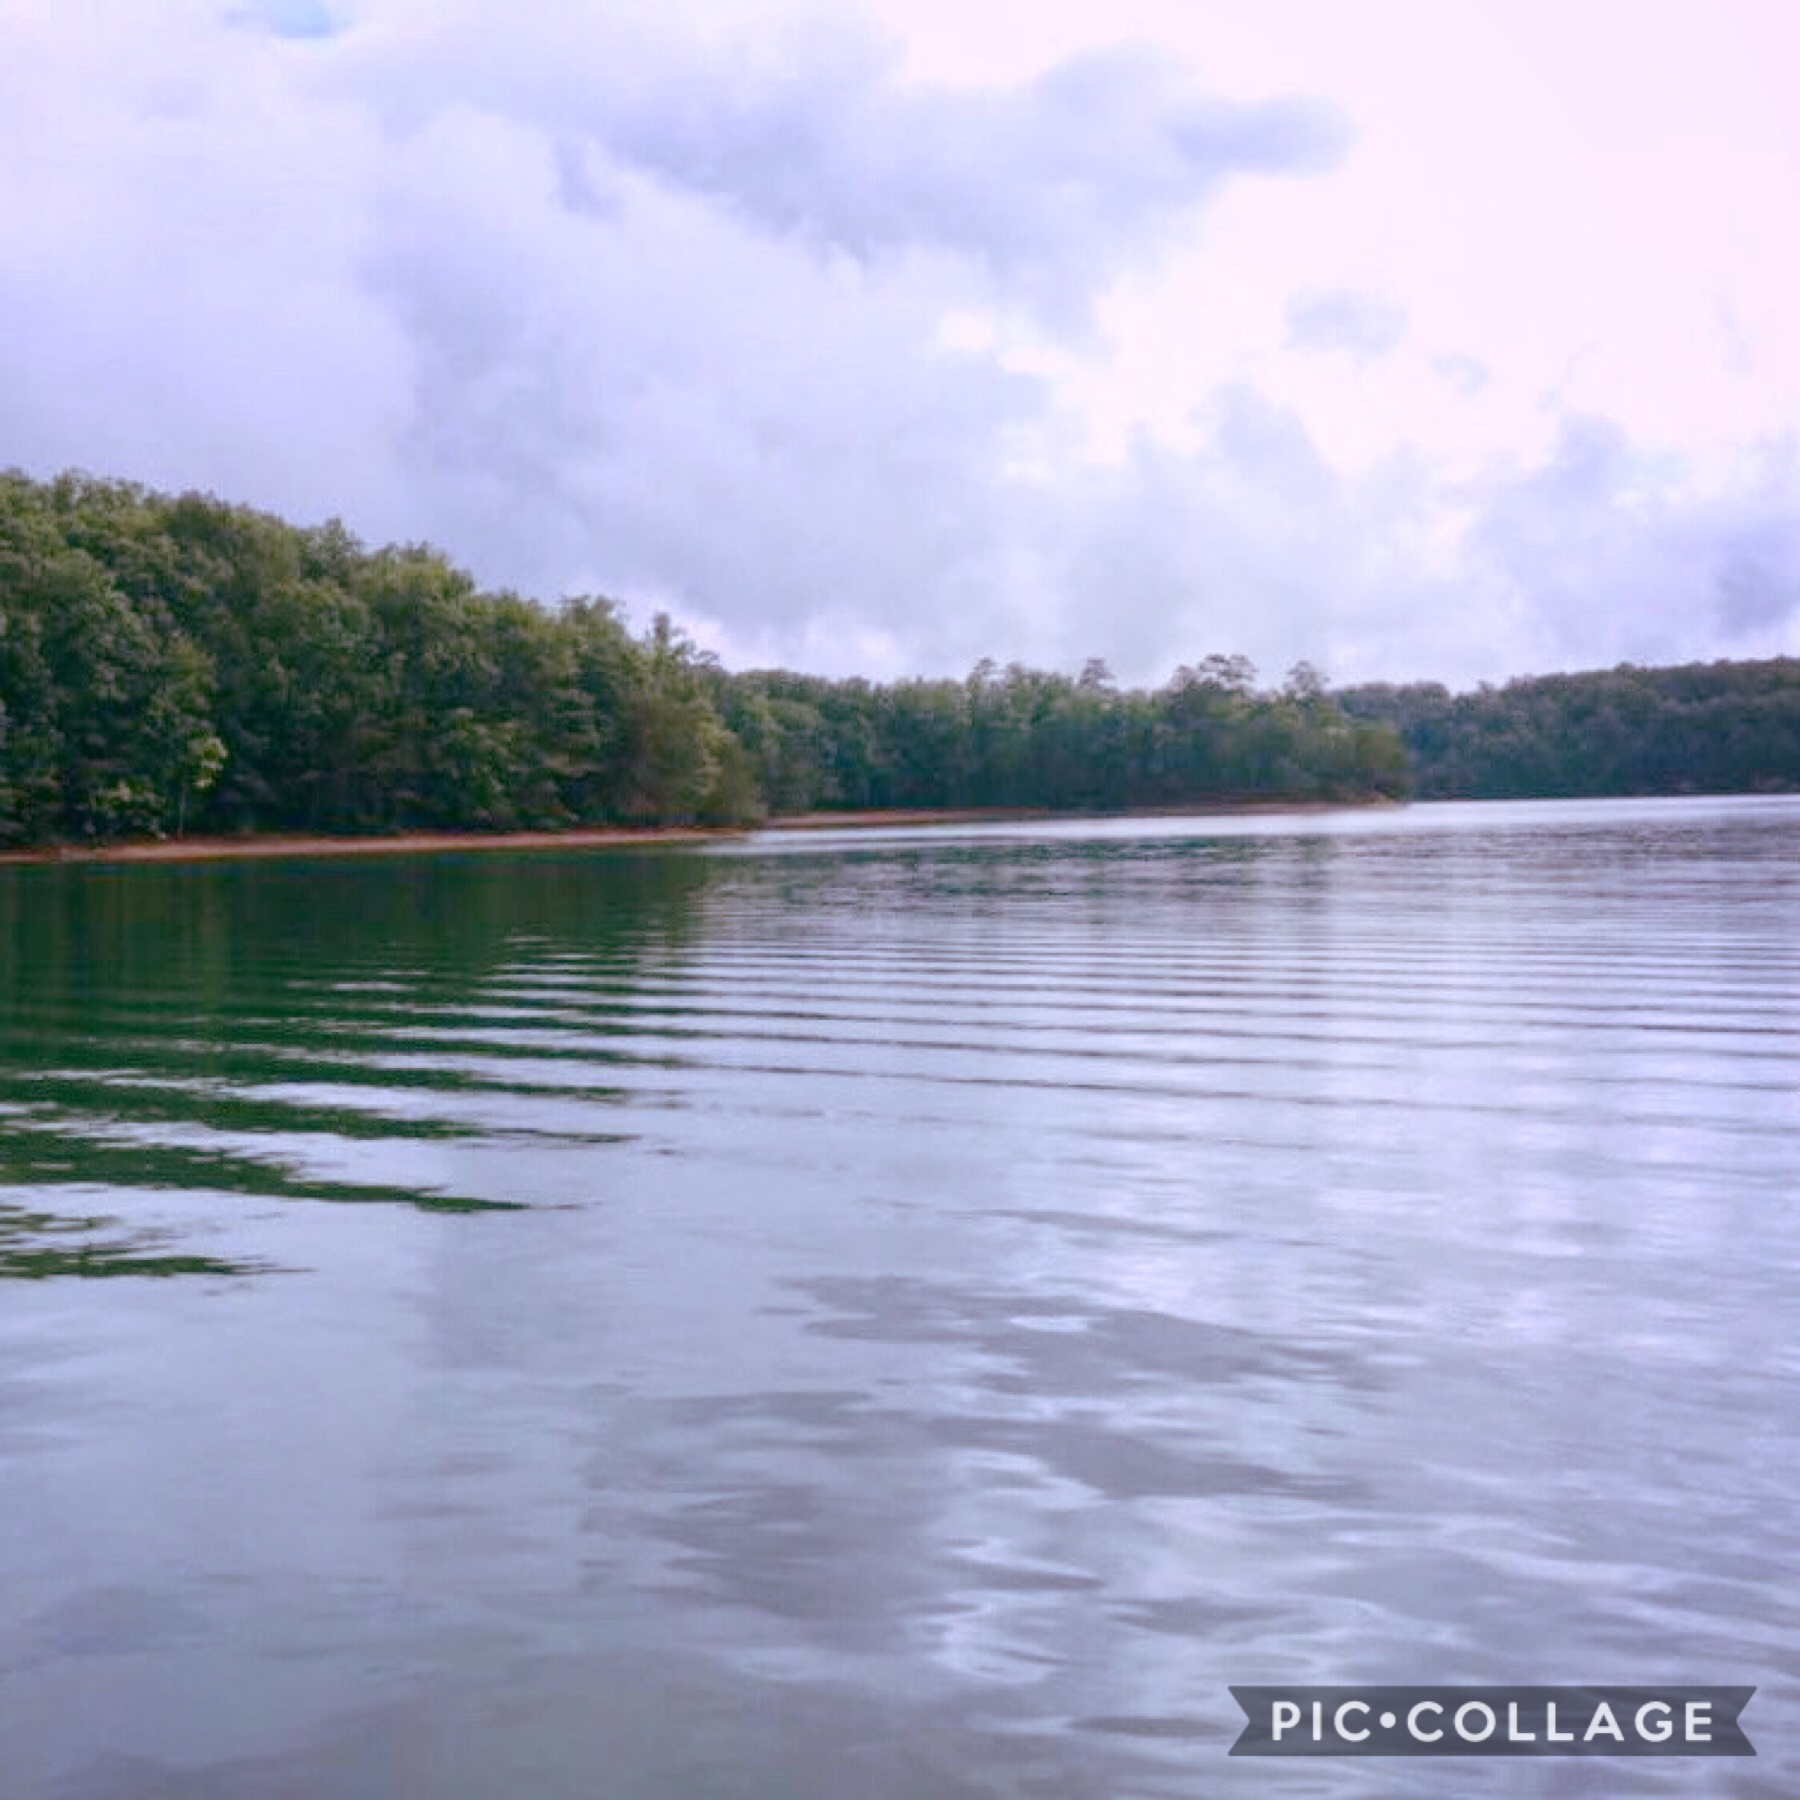 I’ve to the lake every summer with my friend and her family for the past four years and I’m really missing it rn :(( it’s just such a place of solace for me and some of my best summer memories are there 